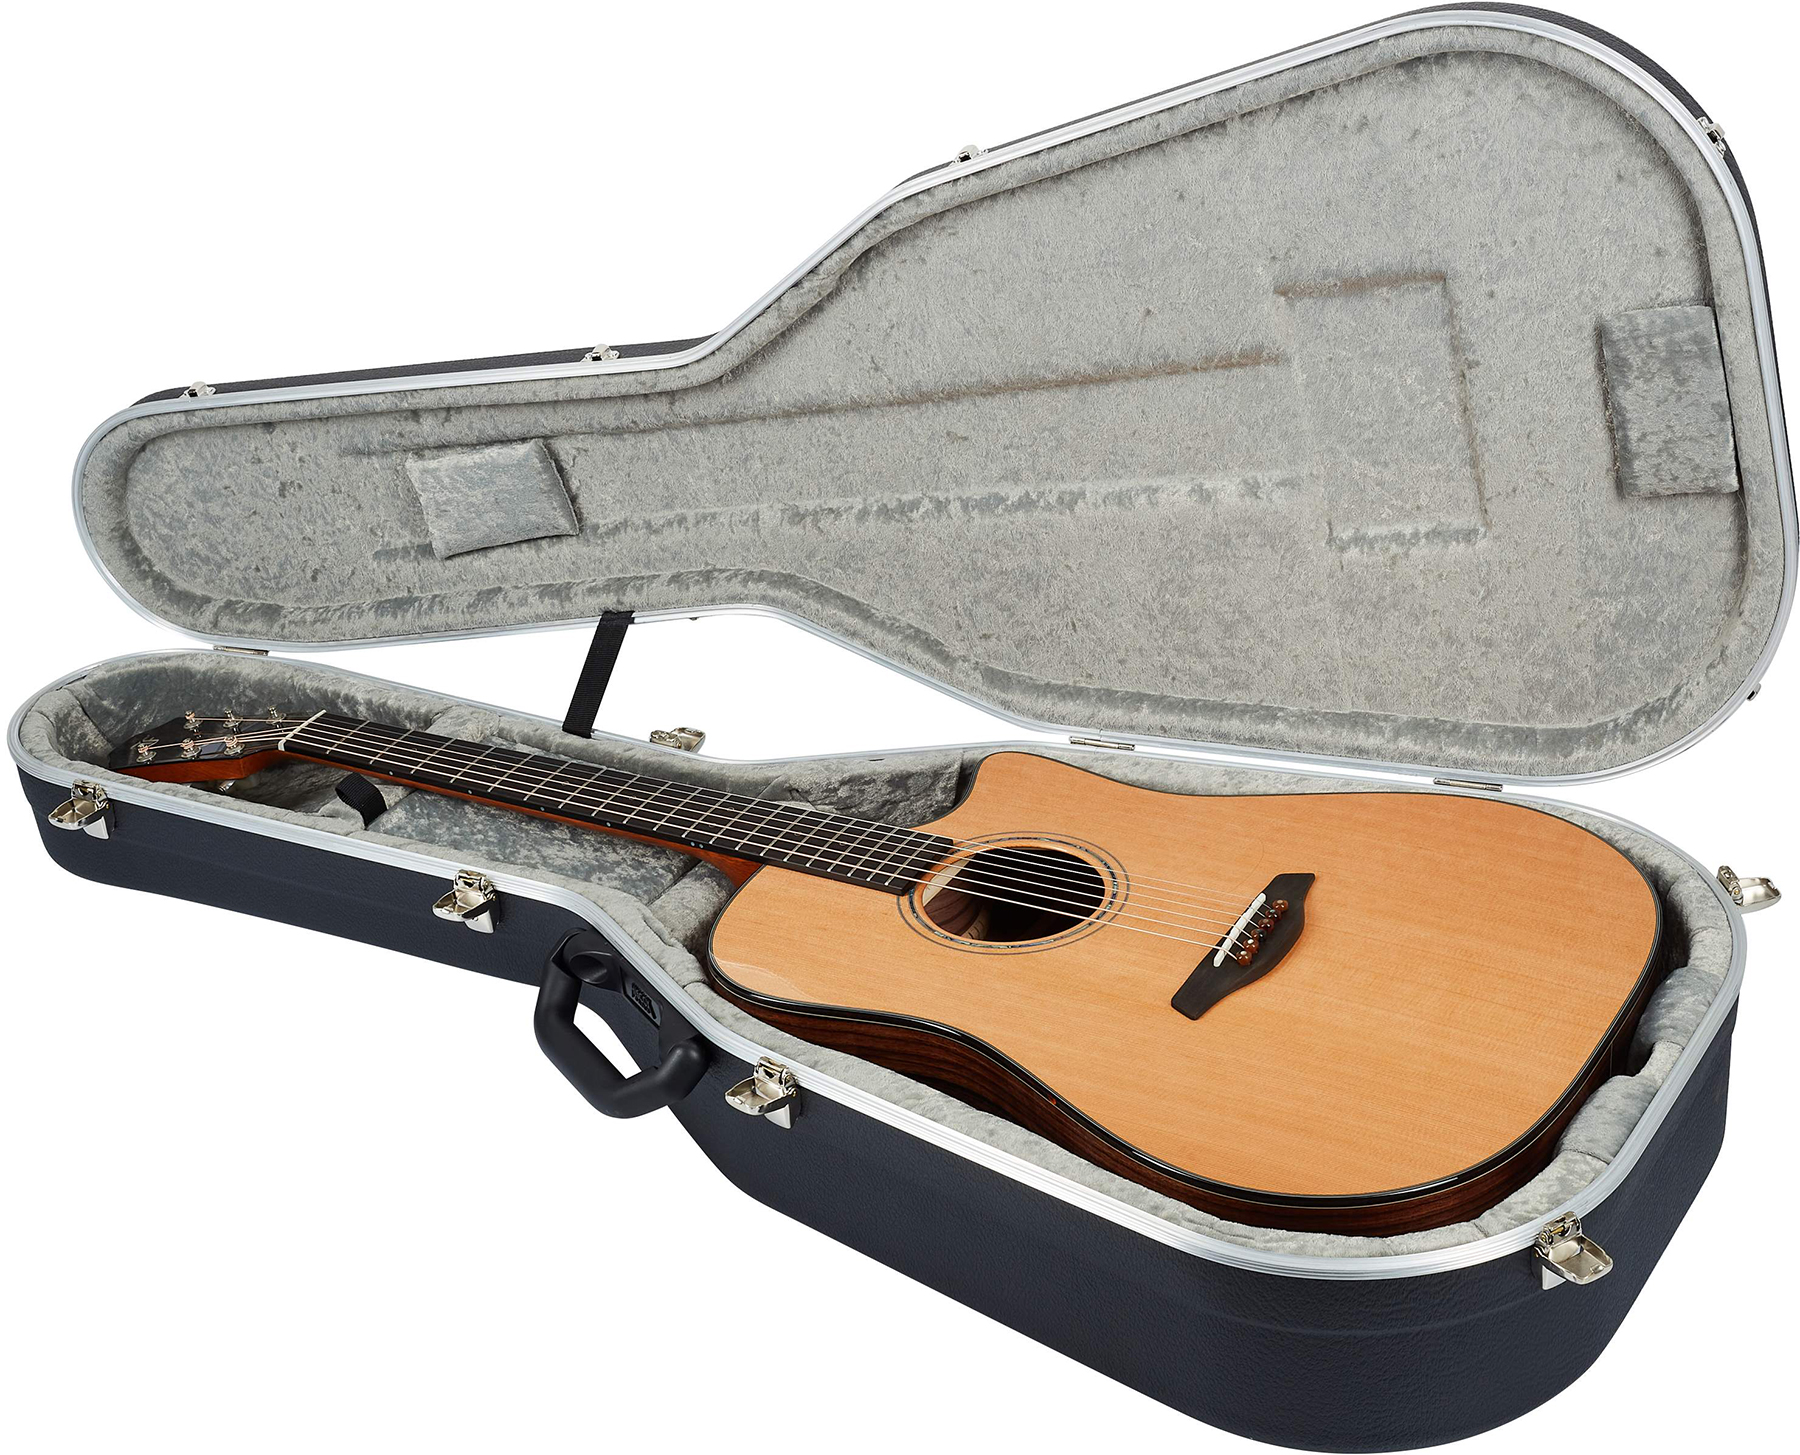 Furch Dc-cr Lrb1 Yellow Dreadnought Cw Cedre Palissandre Eb - Natural Full-pore - Guitare Electro Acoustique - Variation 6